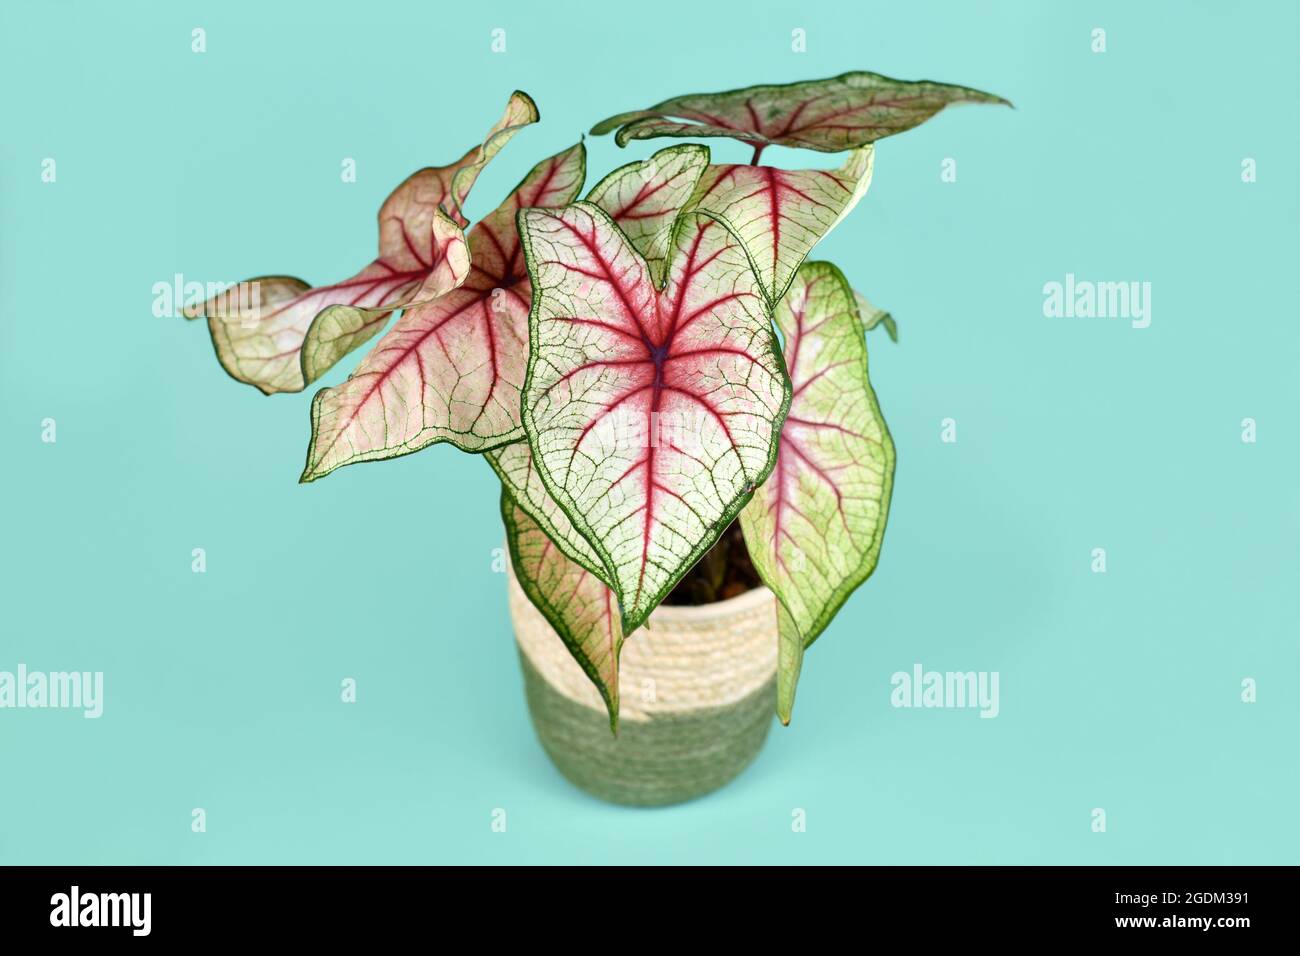 Exotic 'Caladium White Queen' plant with white leaves and pink veins in basket pot on blue background Stock Photo